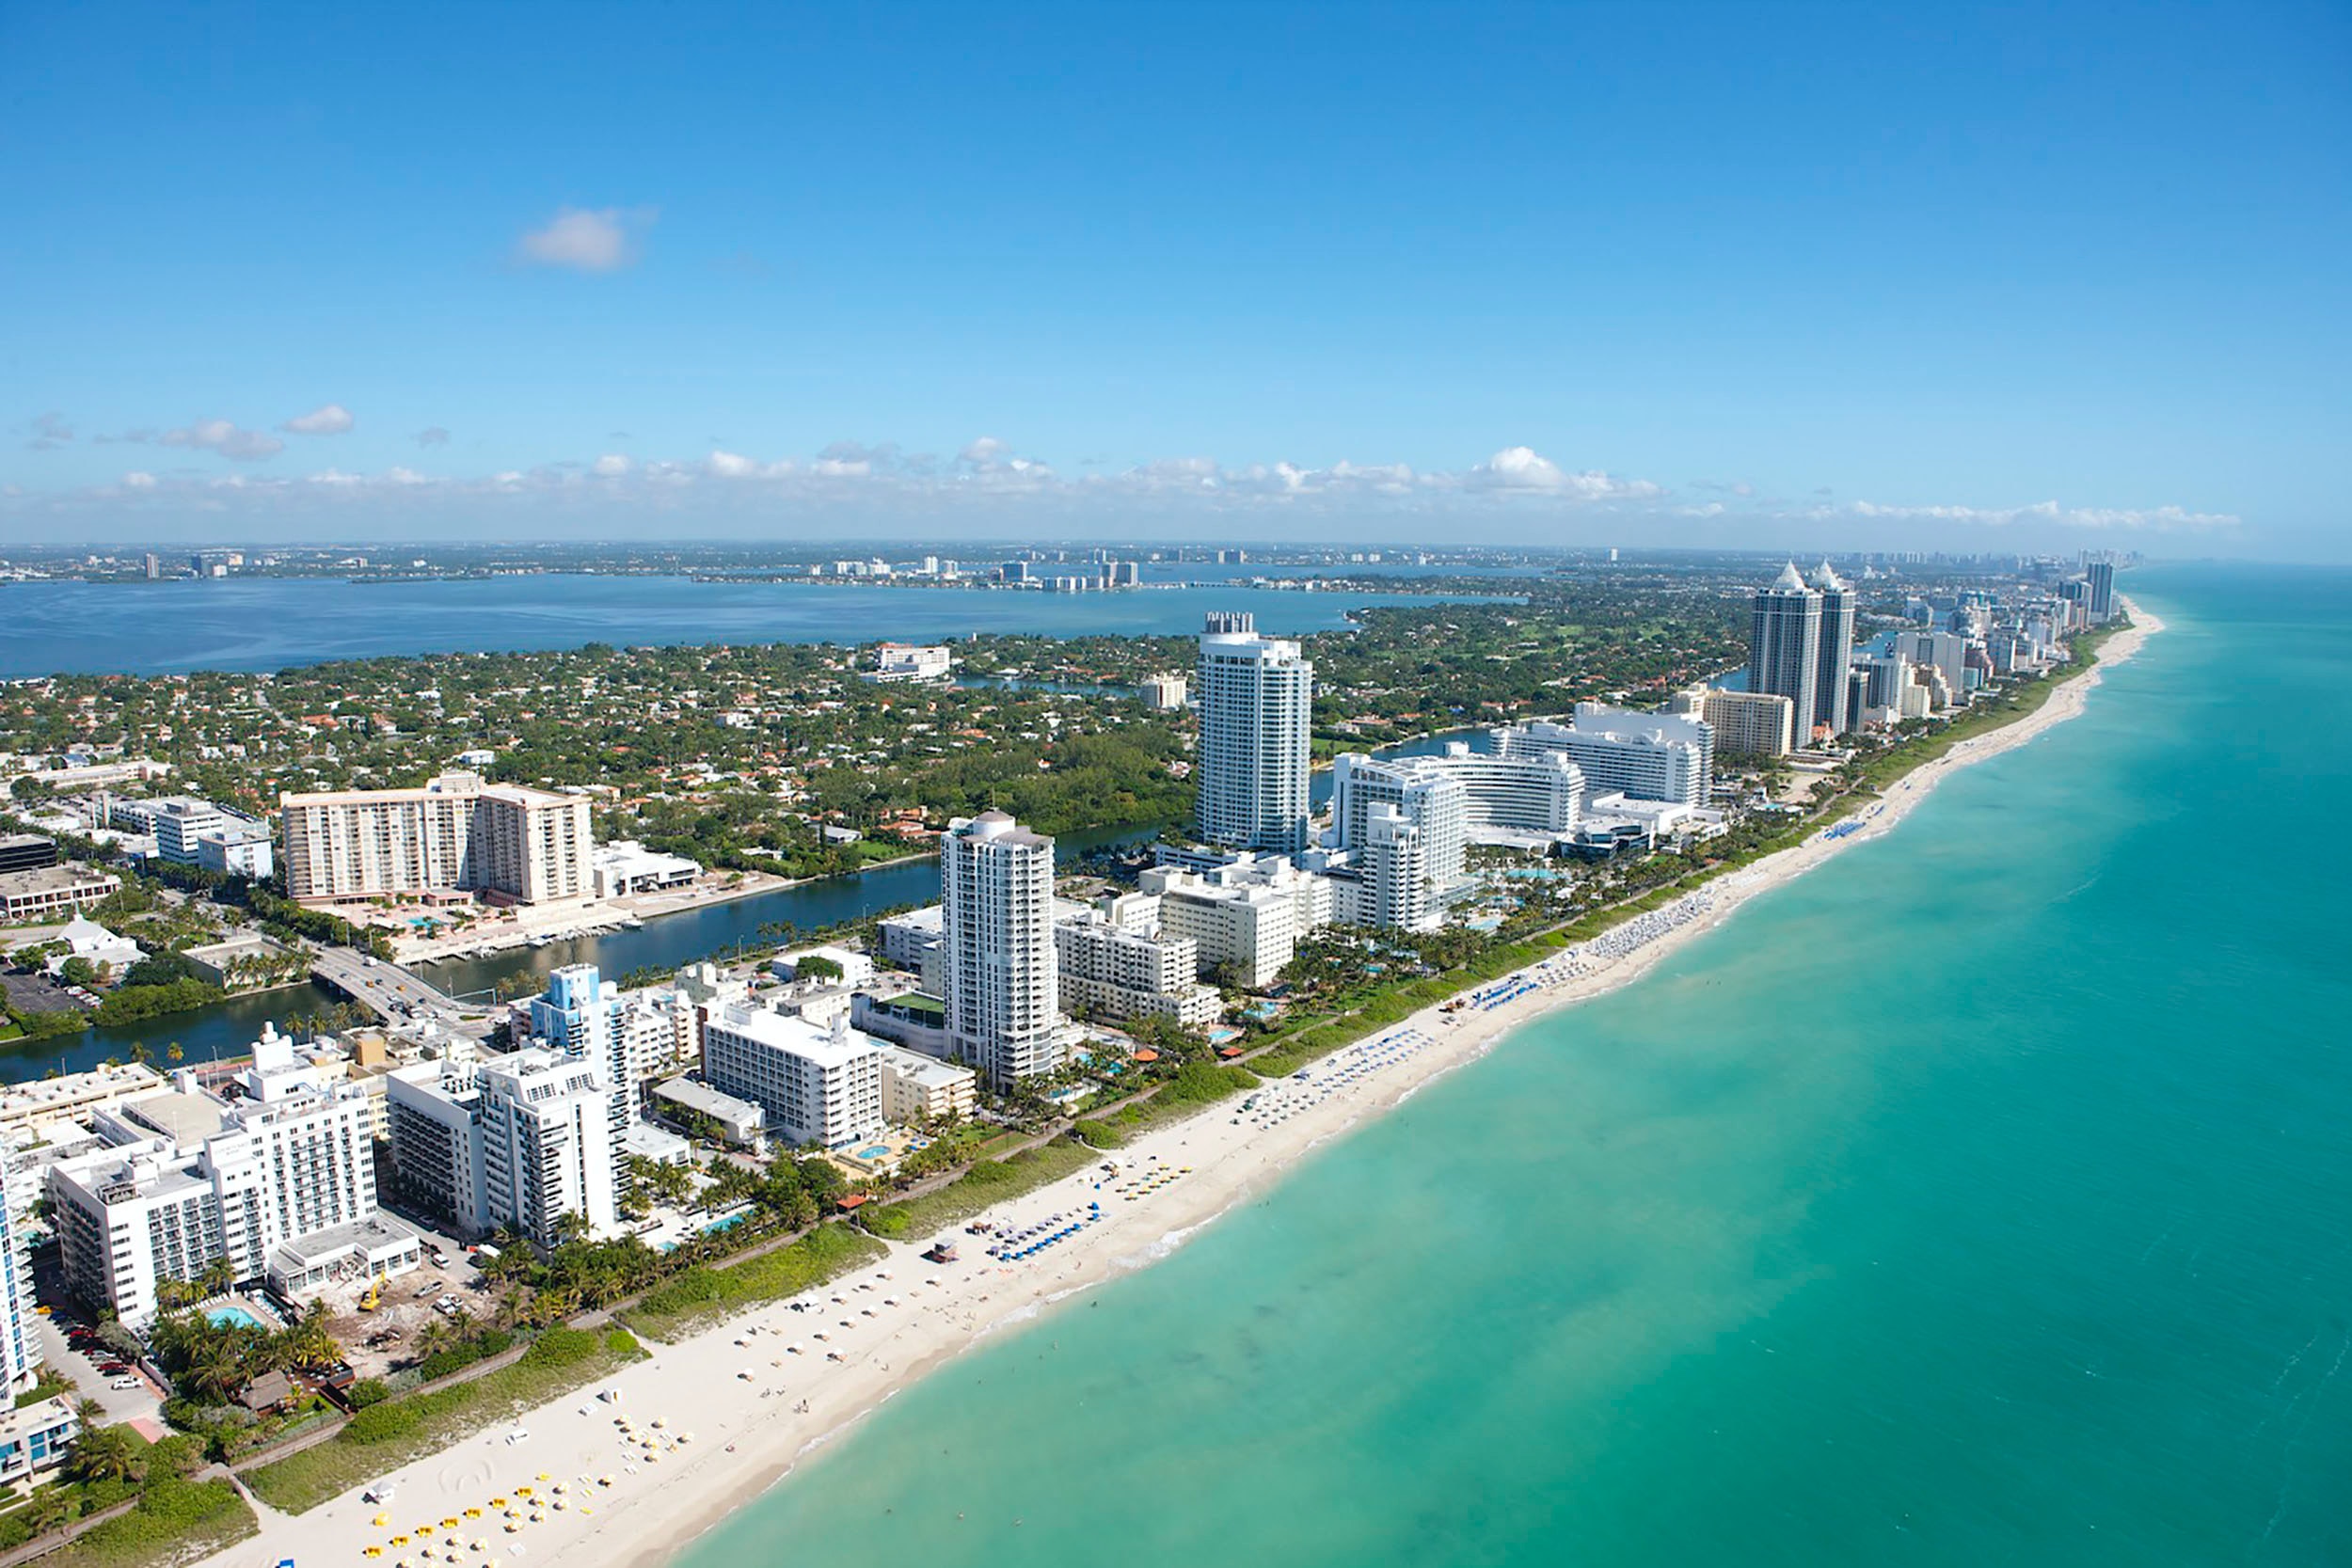 Staysoflo: Discover the best of South Florida